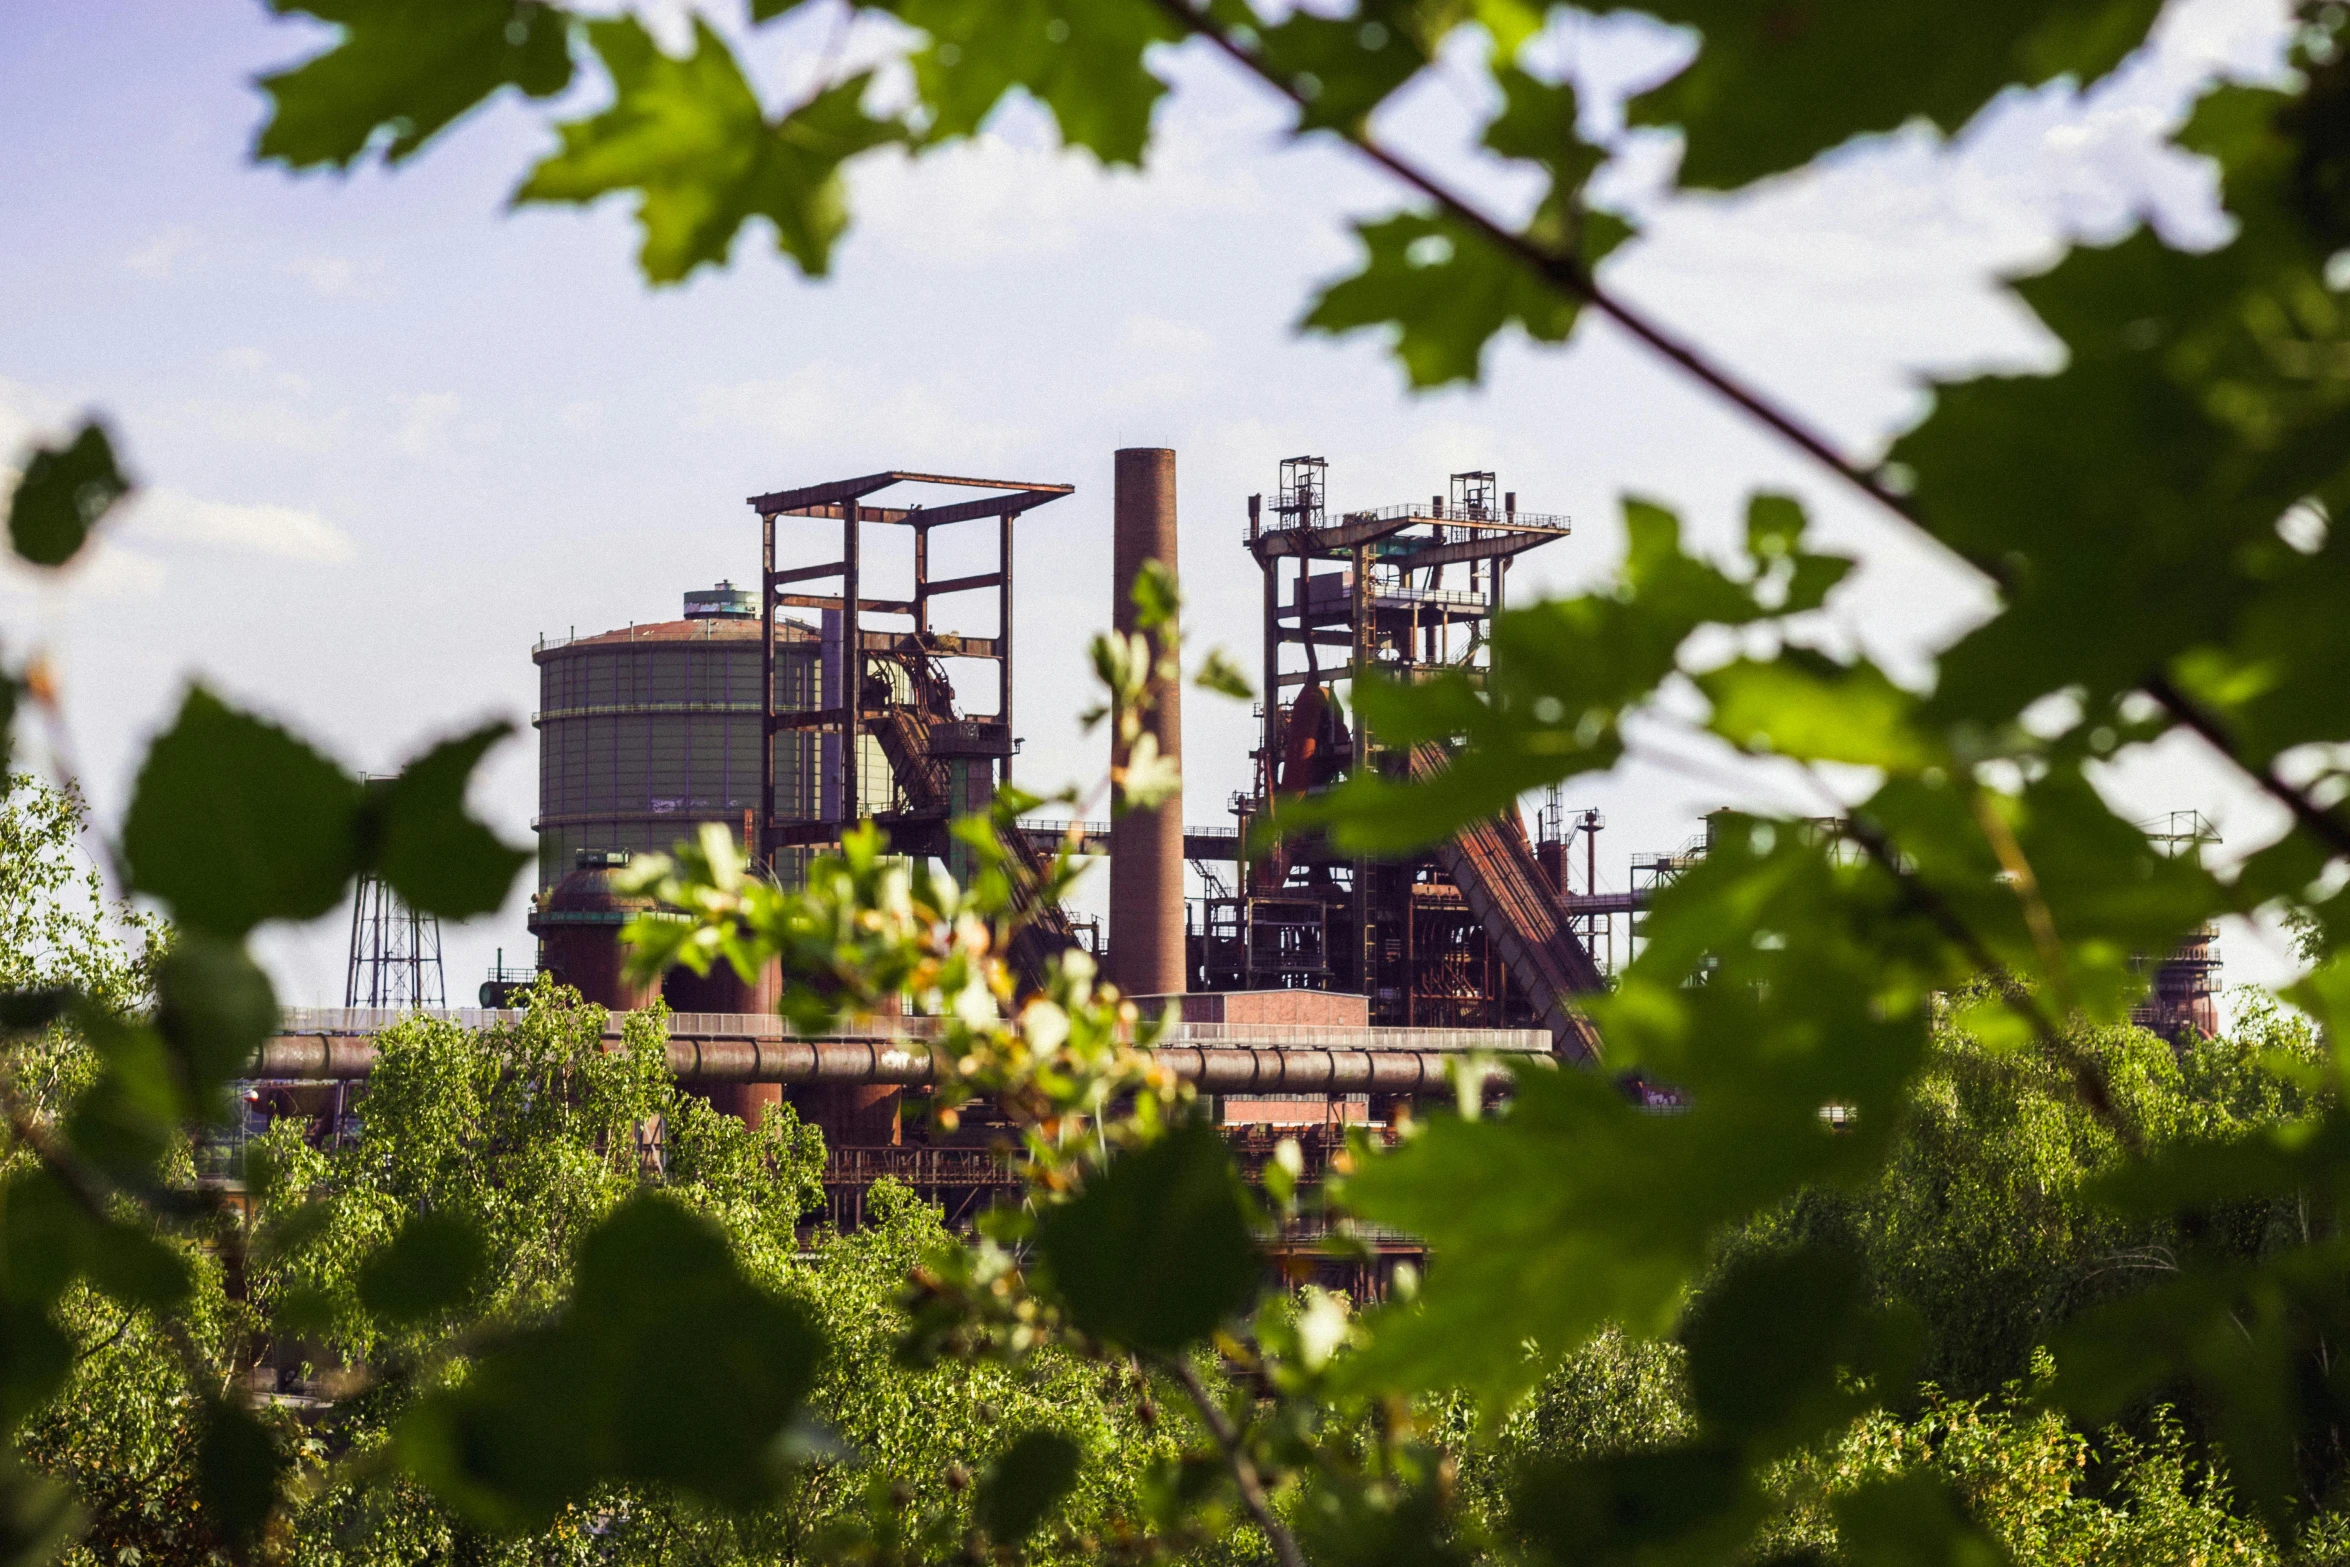 a group of people standing on top of a lush green field, abandoned steelworks, tree and plants, a photograph of a rusty, worksafe. instagram photo